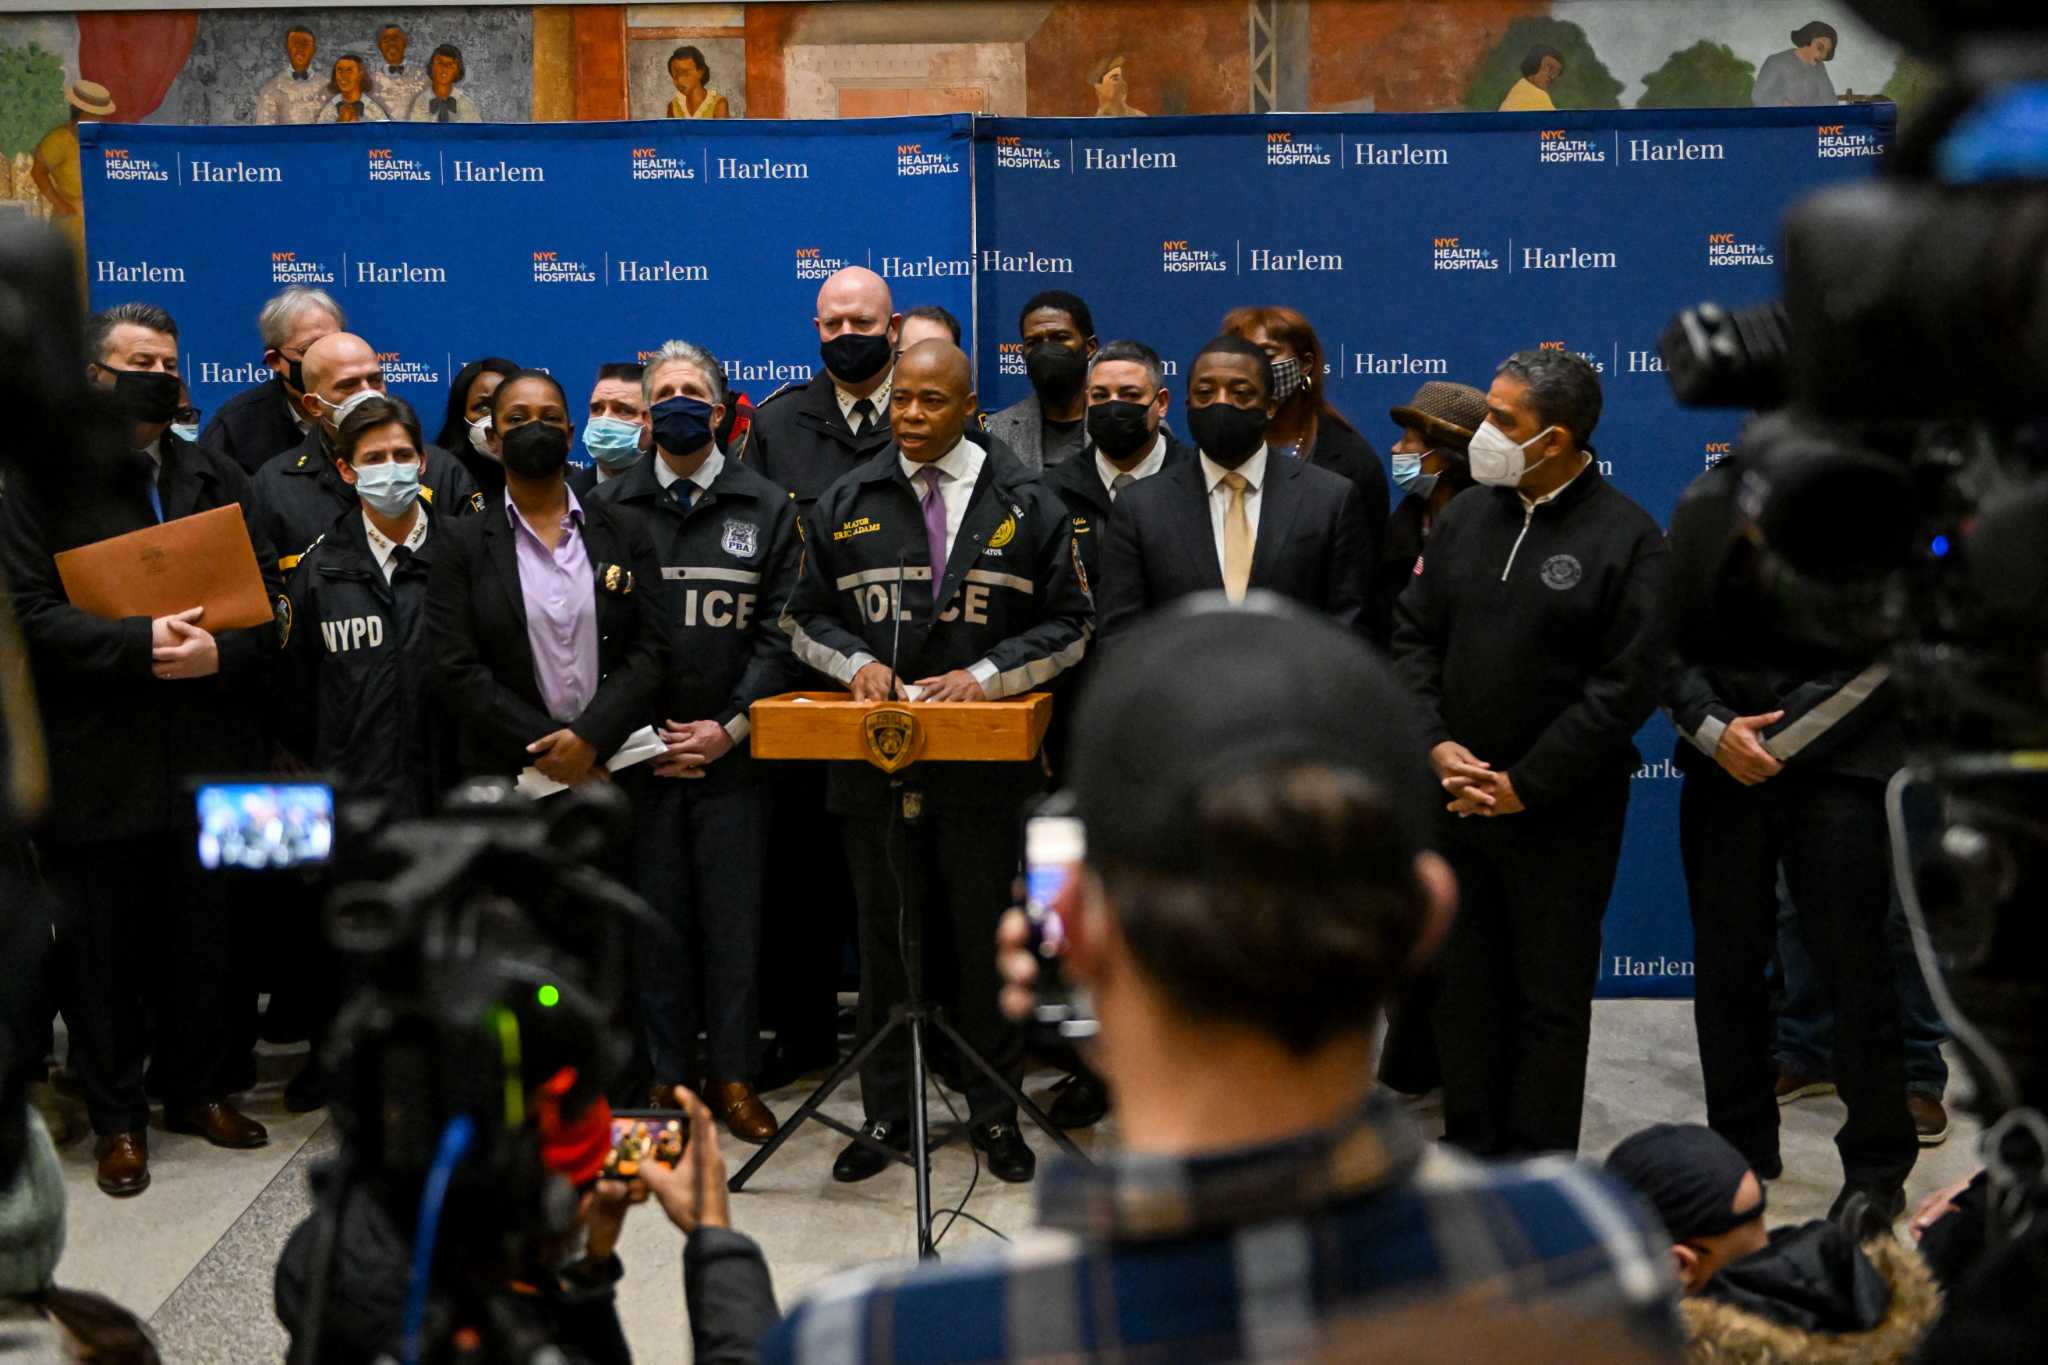 Shooting of NYPD officers prompts some politicians to talk bail and criminal justice reforms